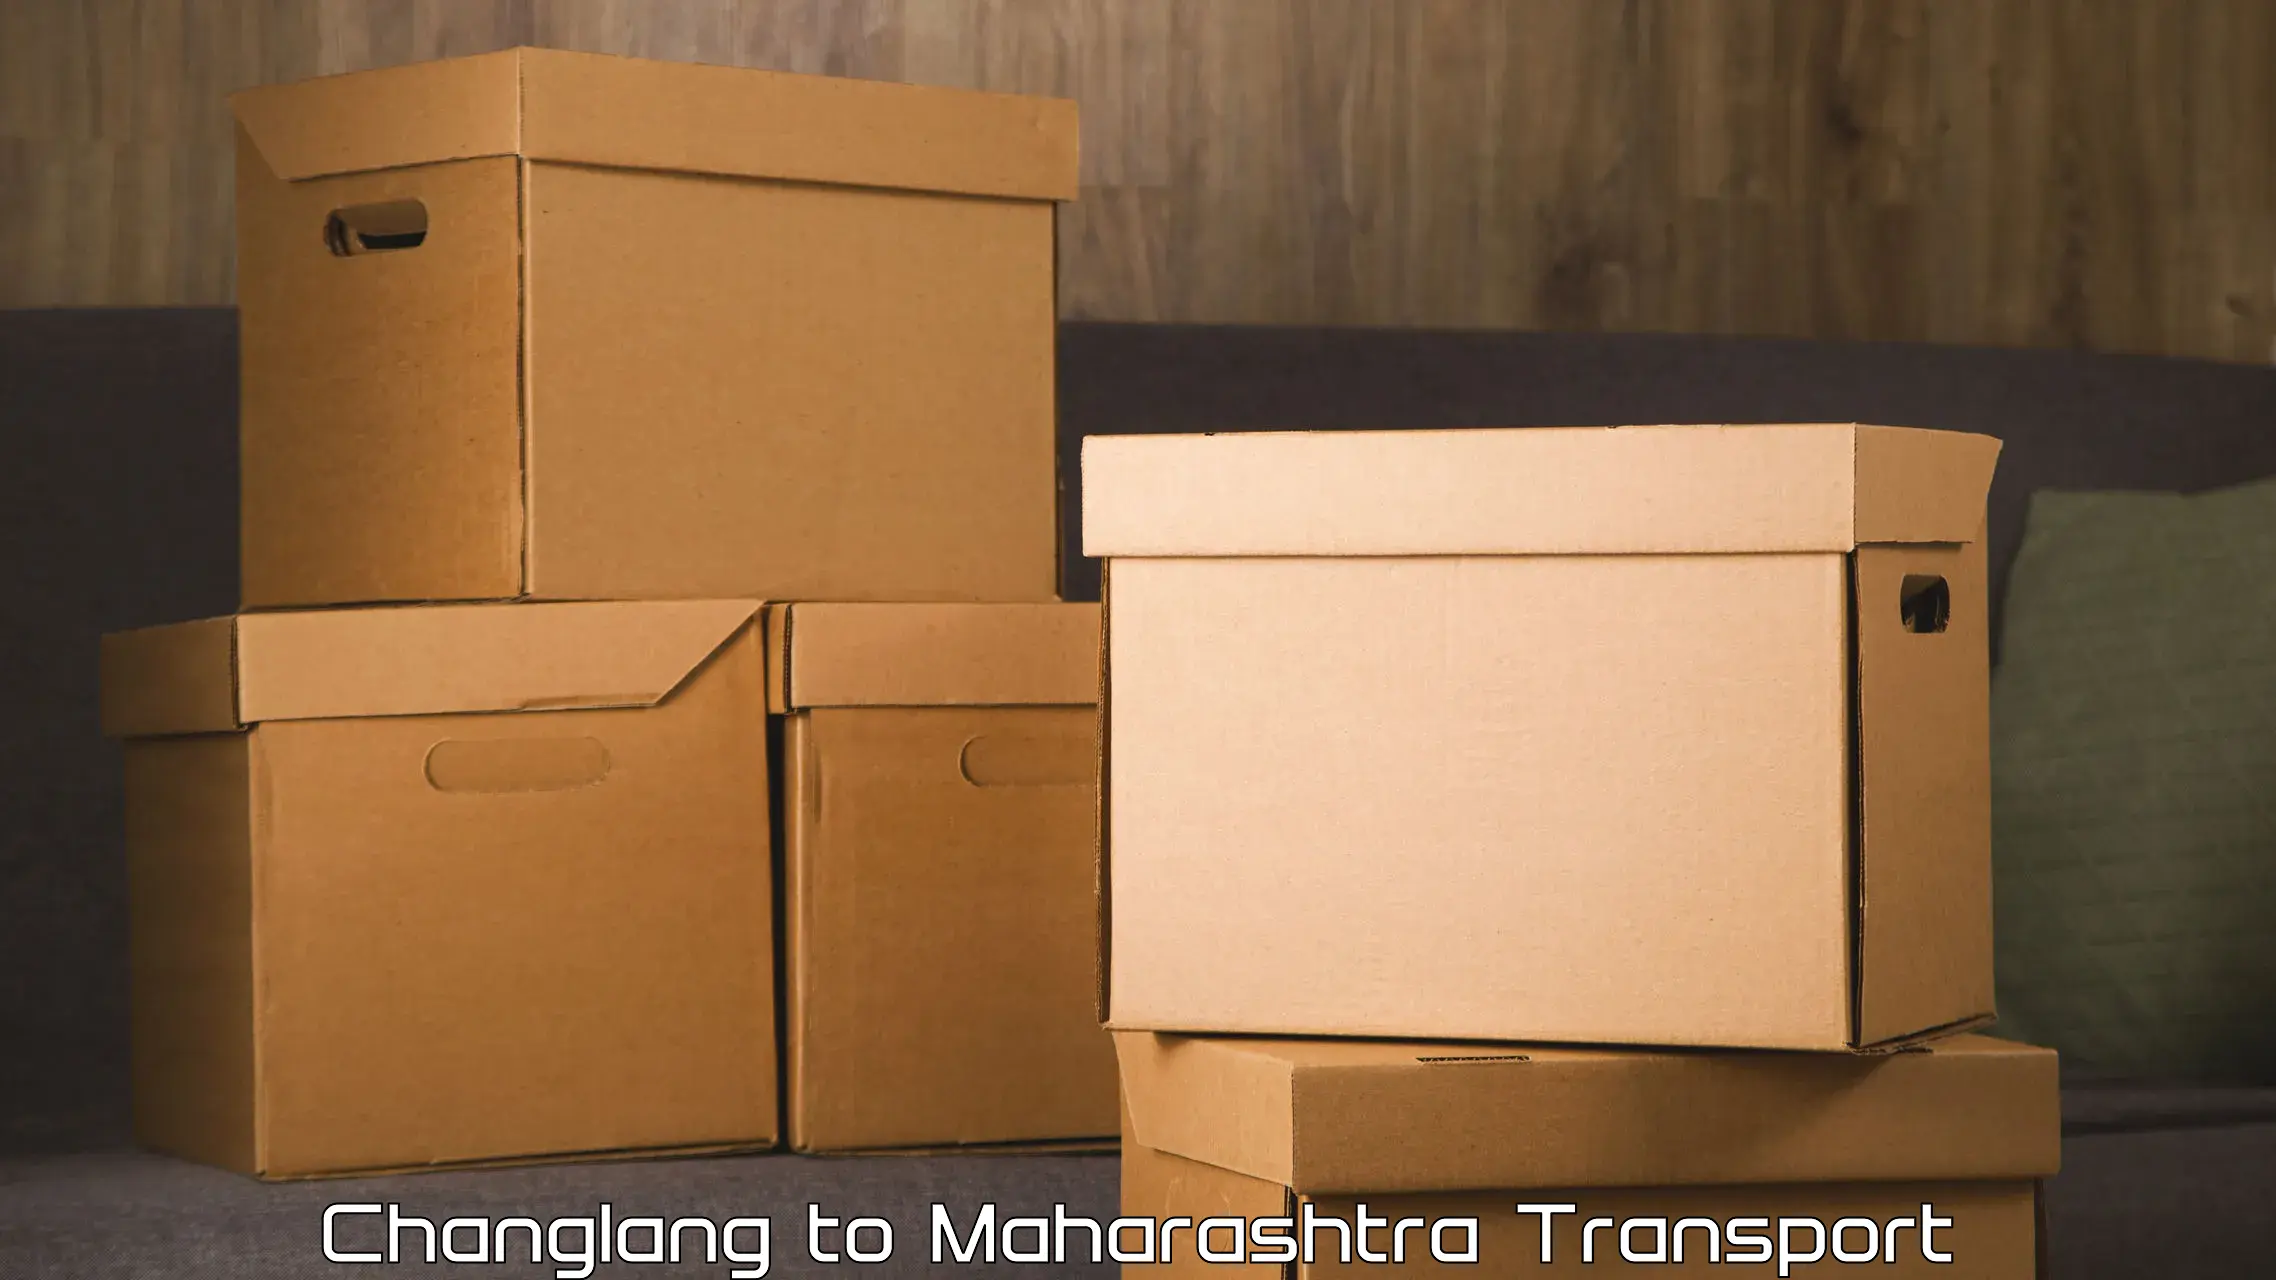 Goods delivery service Changlang to Shegaon